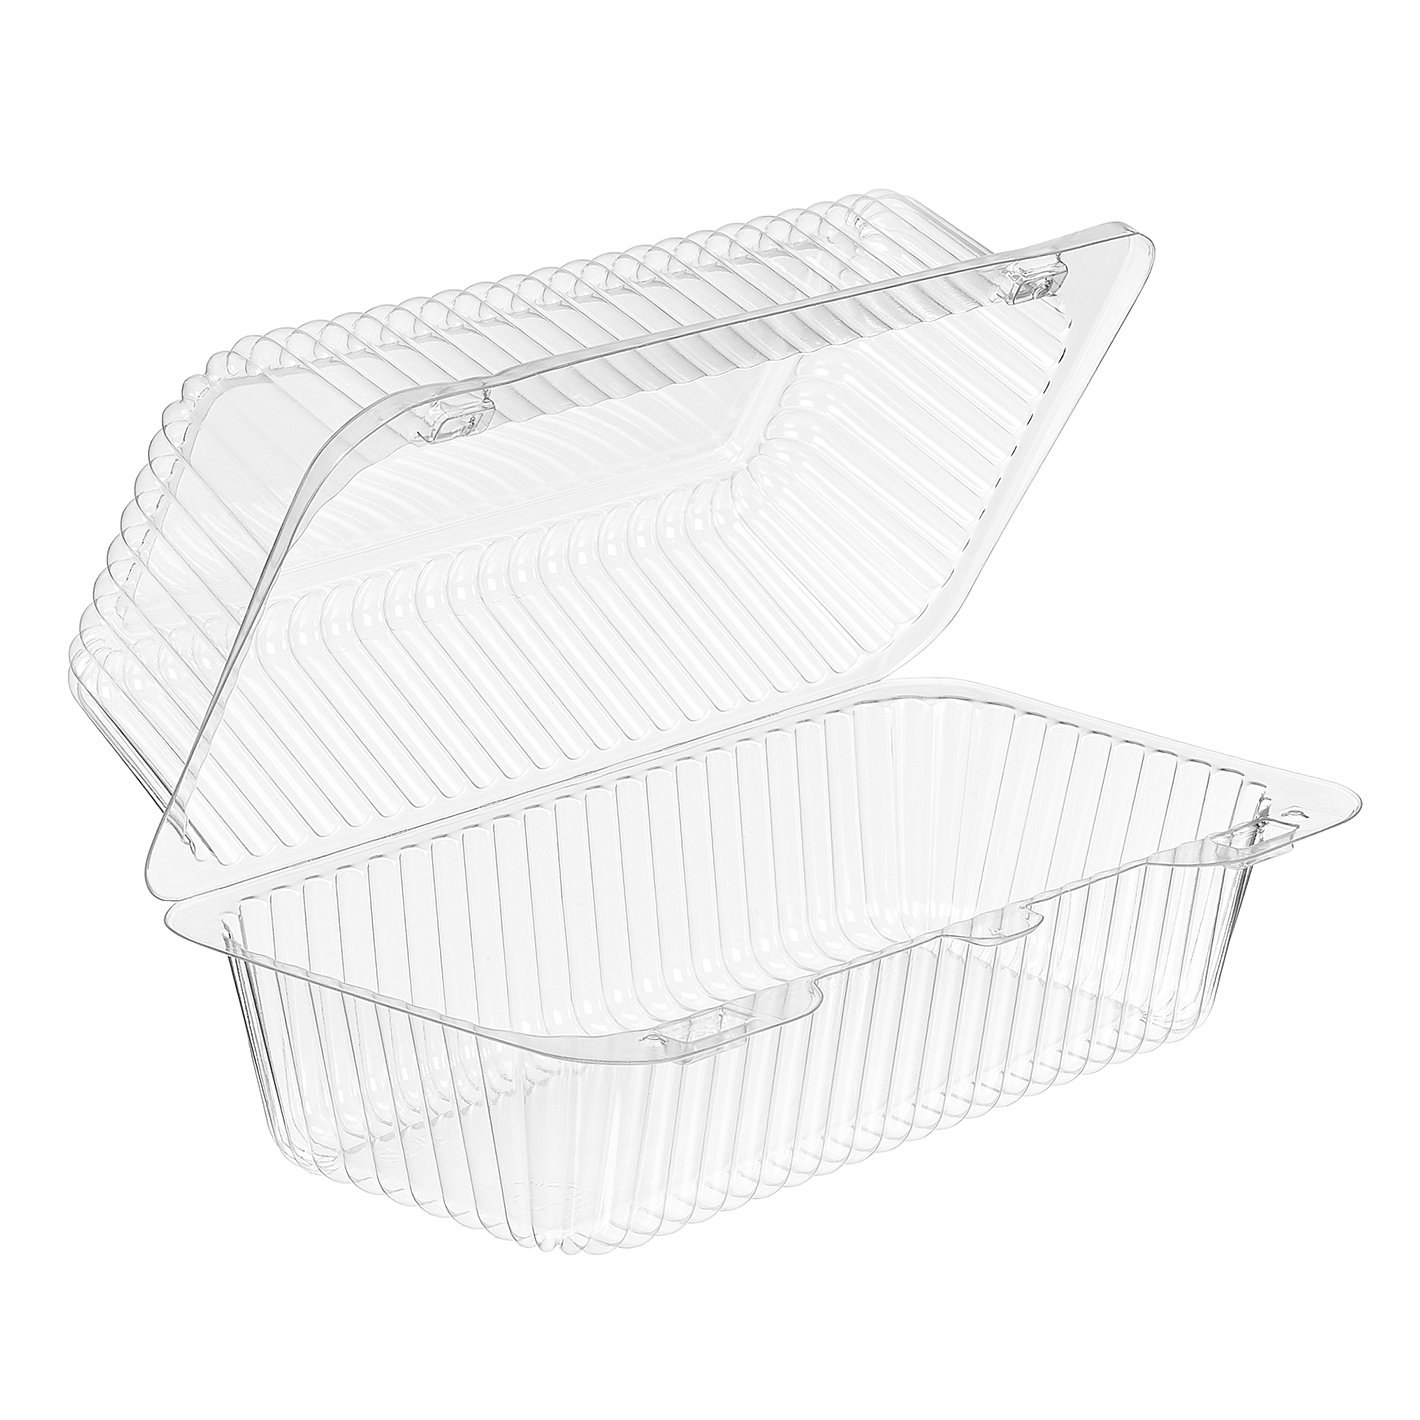 8.5 x 4.5 x 3.75 Surelock® Clear Hinged Cake/Loaf/Danish Container SLP19 300/case